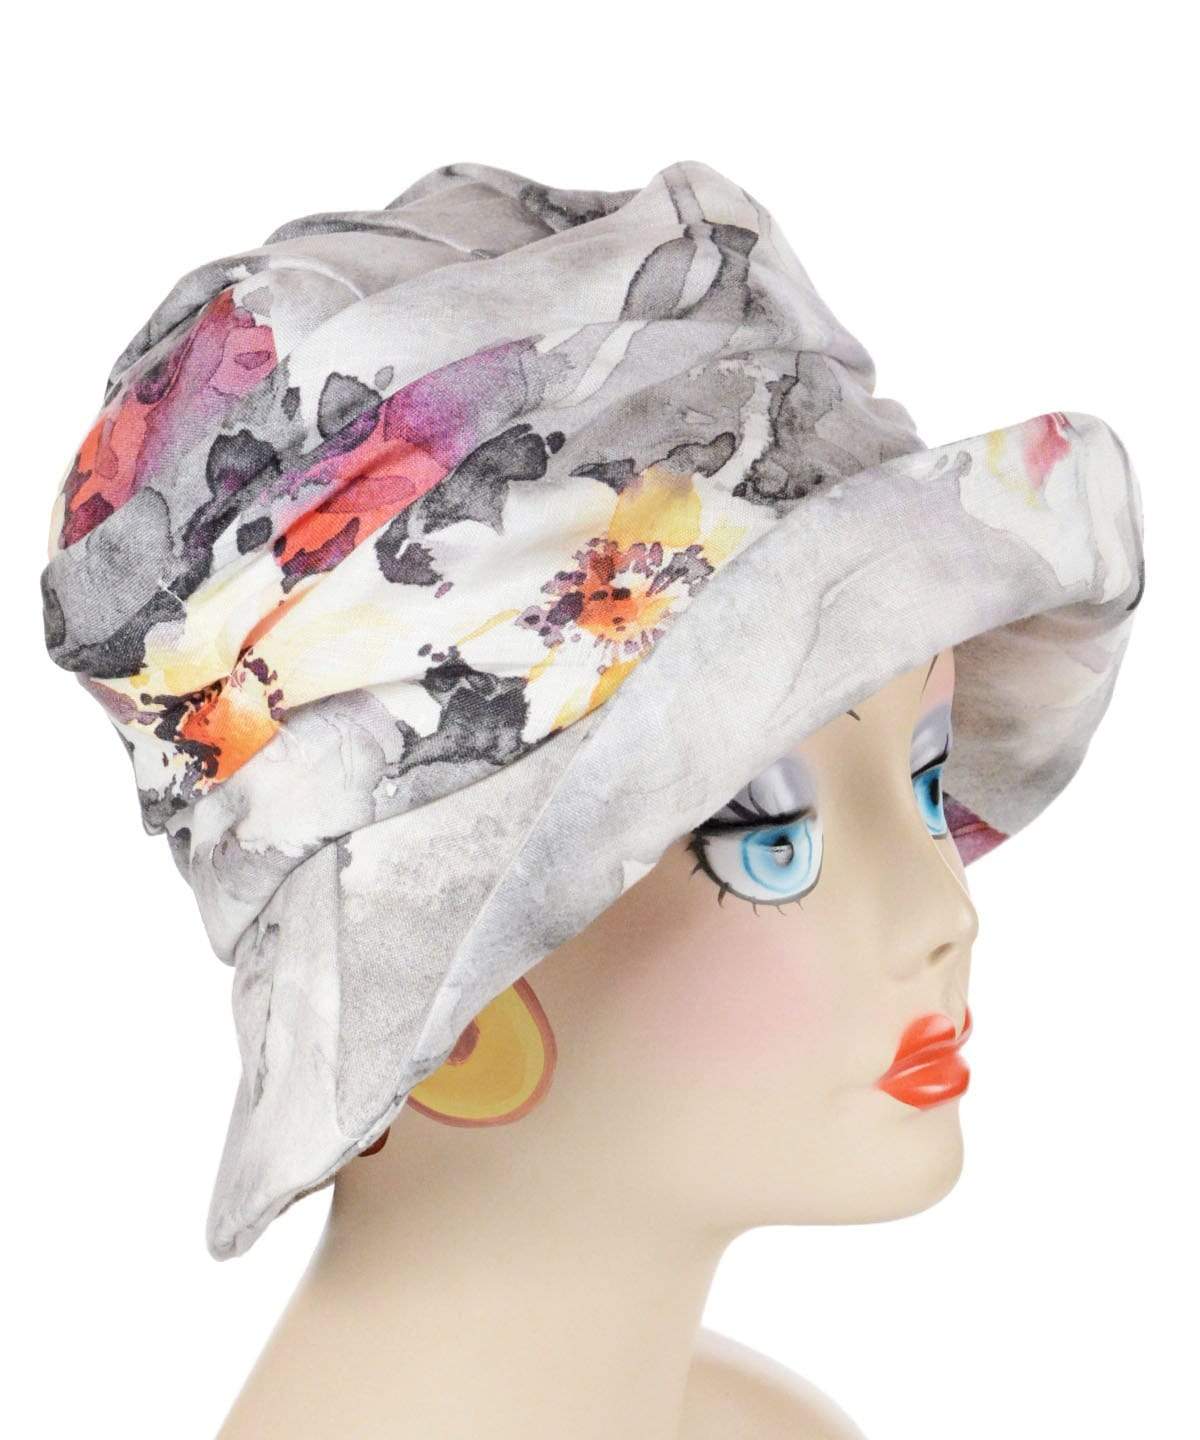 Cuffed Krystyne Bucket Hat in Colorful Floral Linen Handmade in Seattle WA by Pandemonium Millinery USA